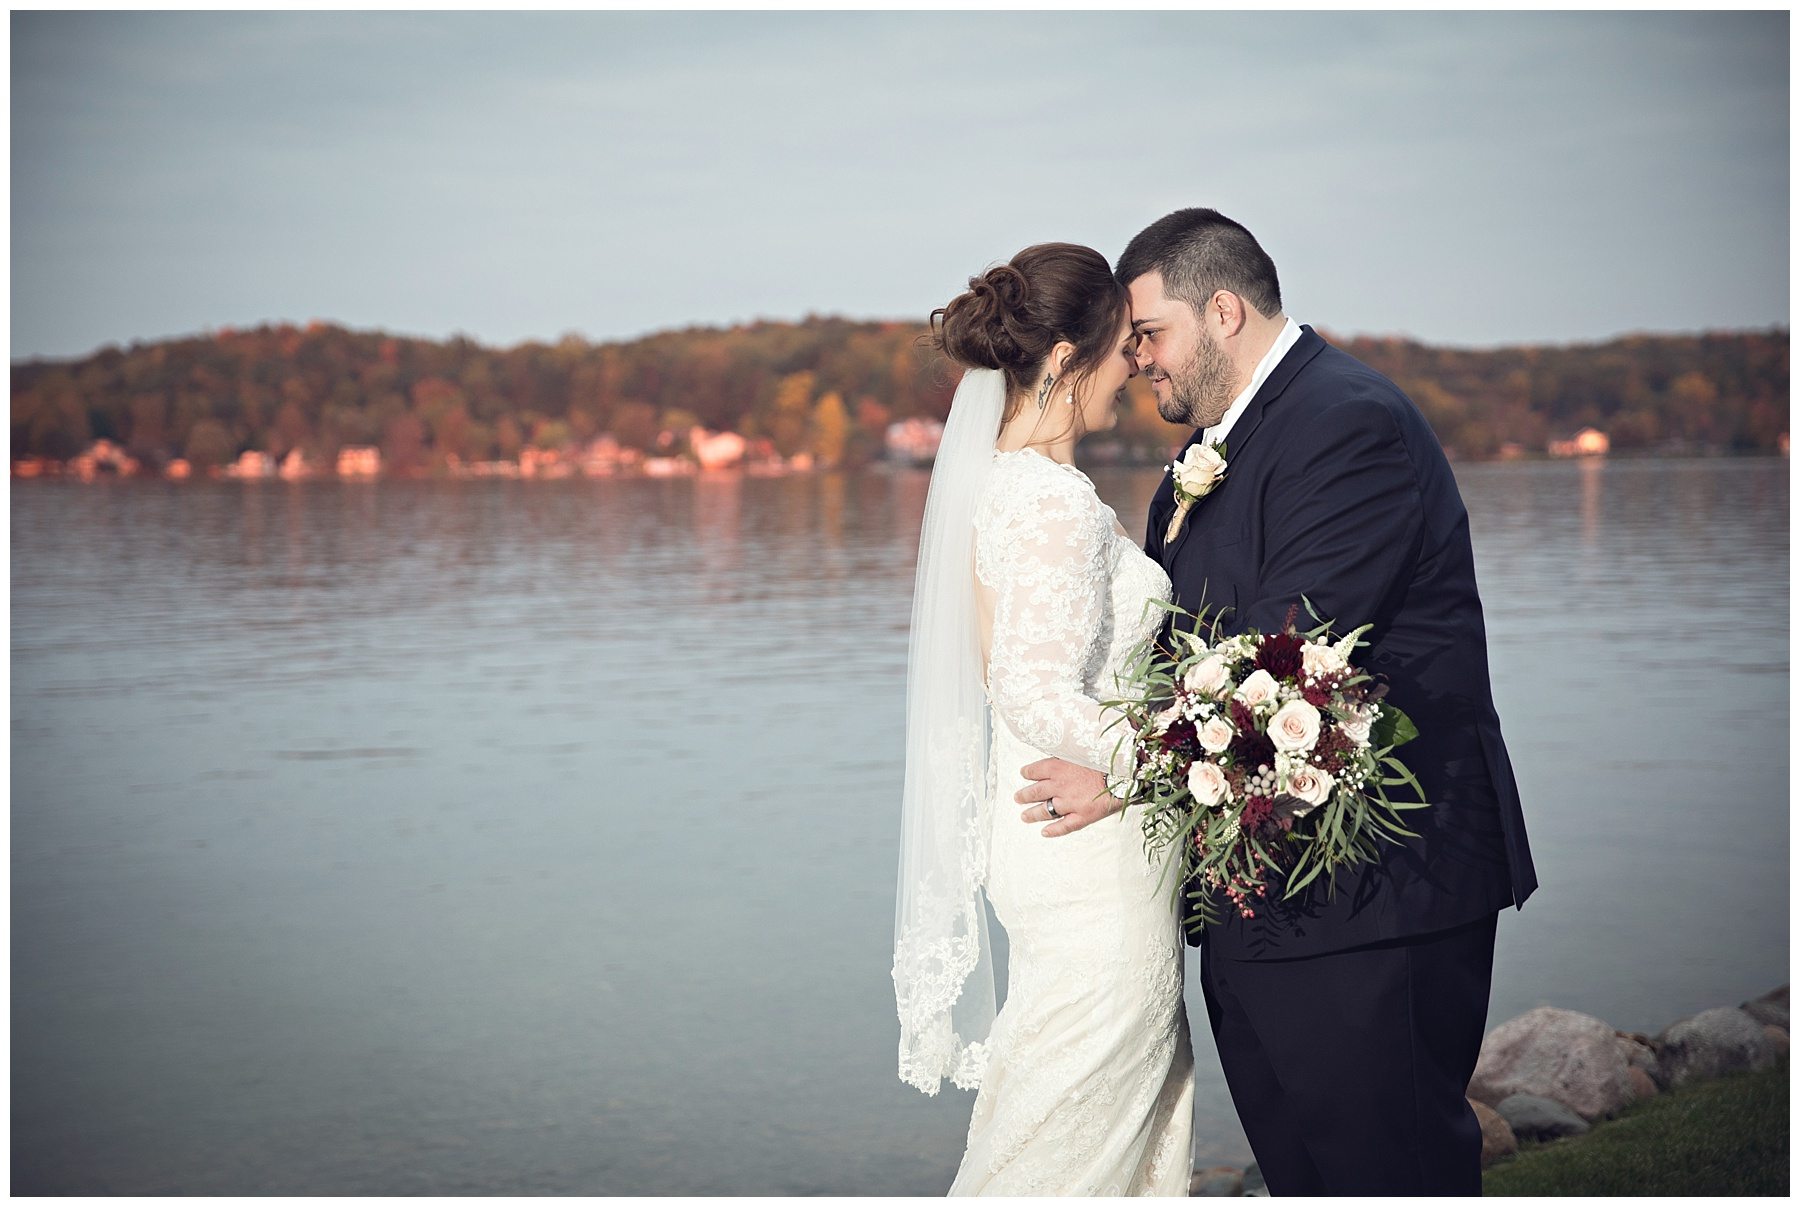 Bride and groom at sunset at Bay Pointe Inn on Gun Lake photographed by Melissa Gregersen Photography